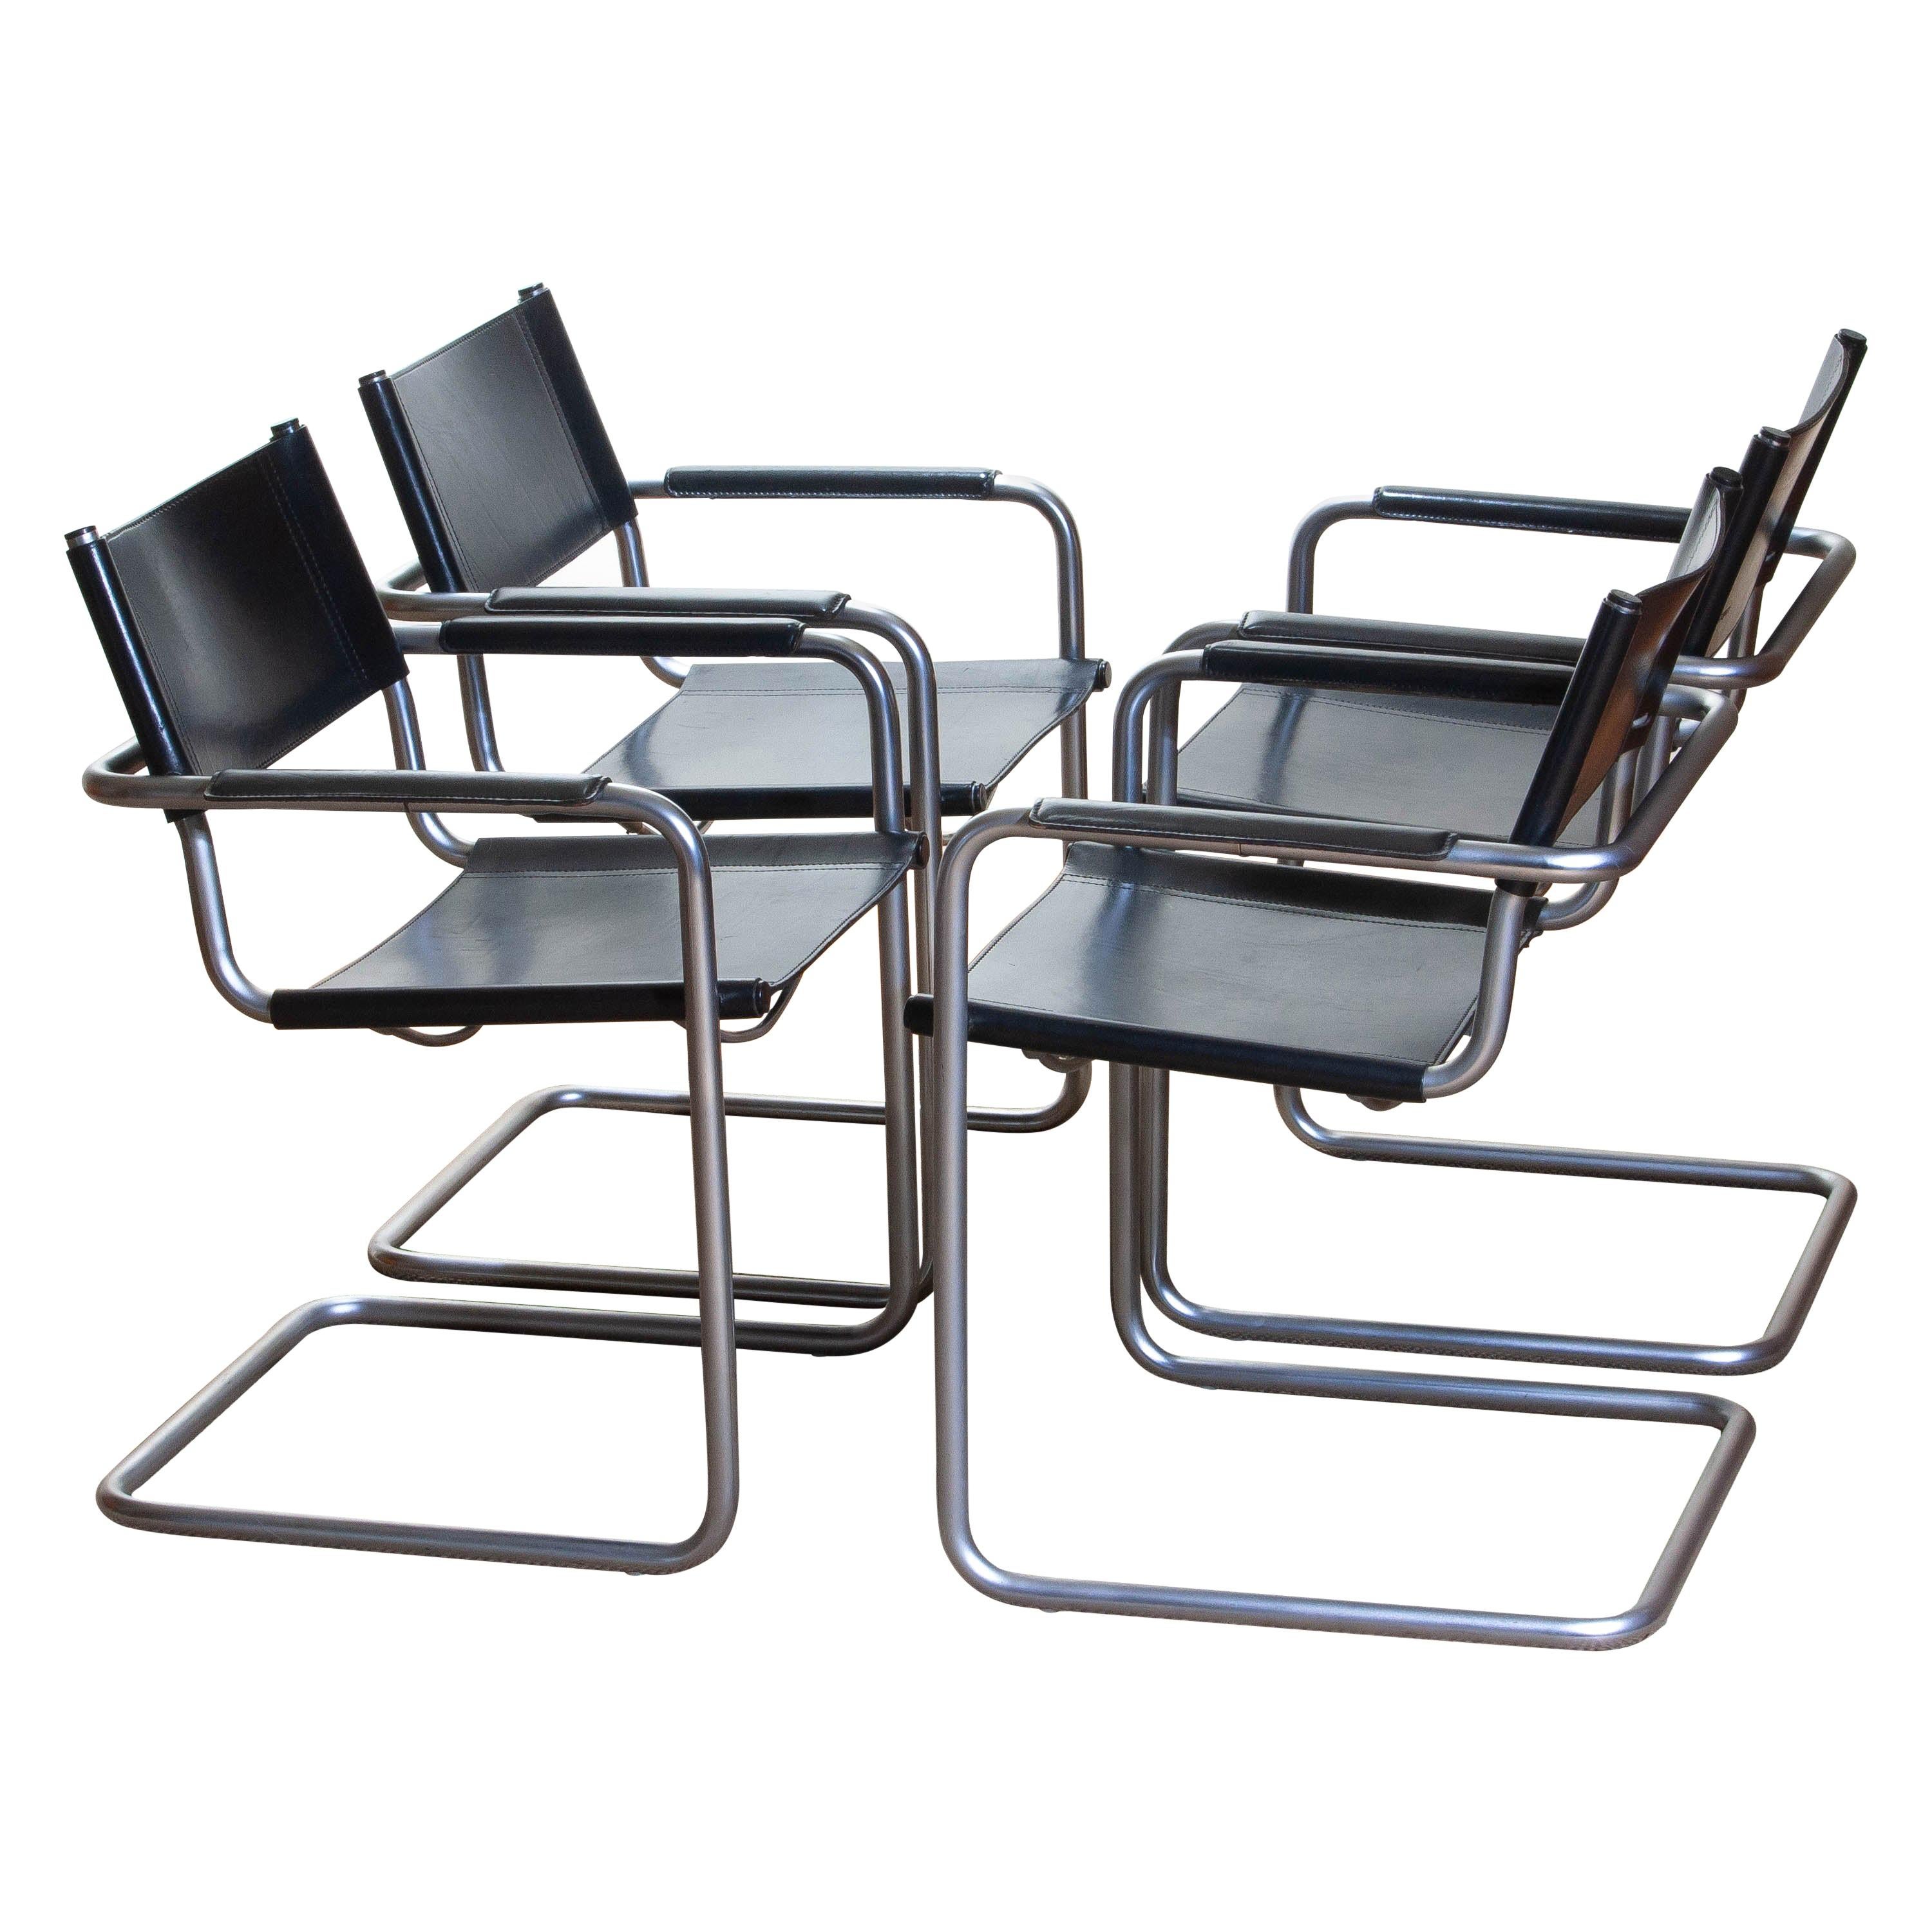 1970, perfect set of four dining / office chairs made by Matteo Grassi, Italy.
The chairs have tubular titanium look steel frames with sturdy black leather seating and backrest.
They are signed on the back of the backrest.
Overall condition is